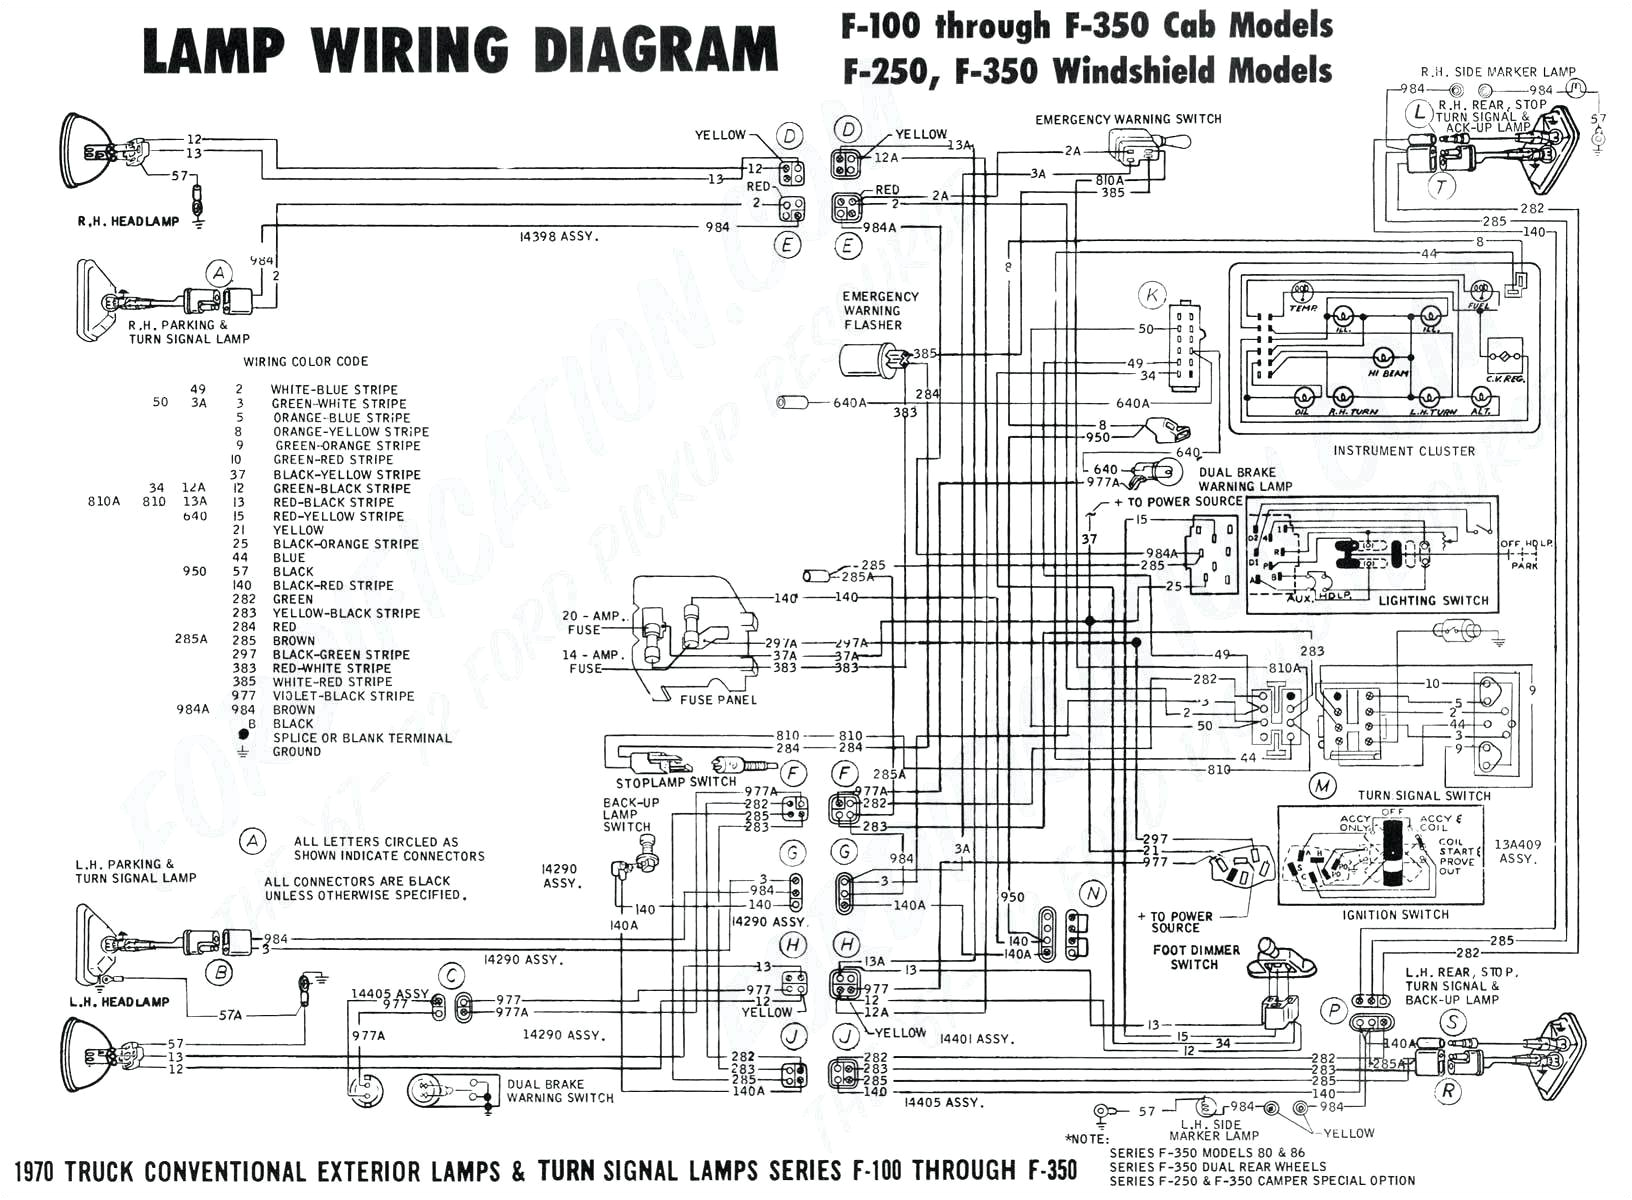 peterbilt 330 wiring diagram 2001 peterbilt 379 wiring diagram to her with painless wiring fuse rh gmp pany co 2007 peterbilt wiring diagram 2011 peterbilt wiring diagram 9k jpg